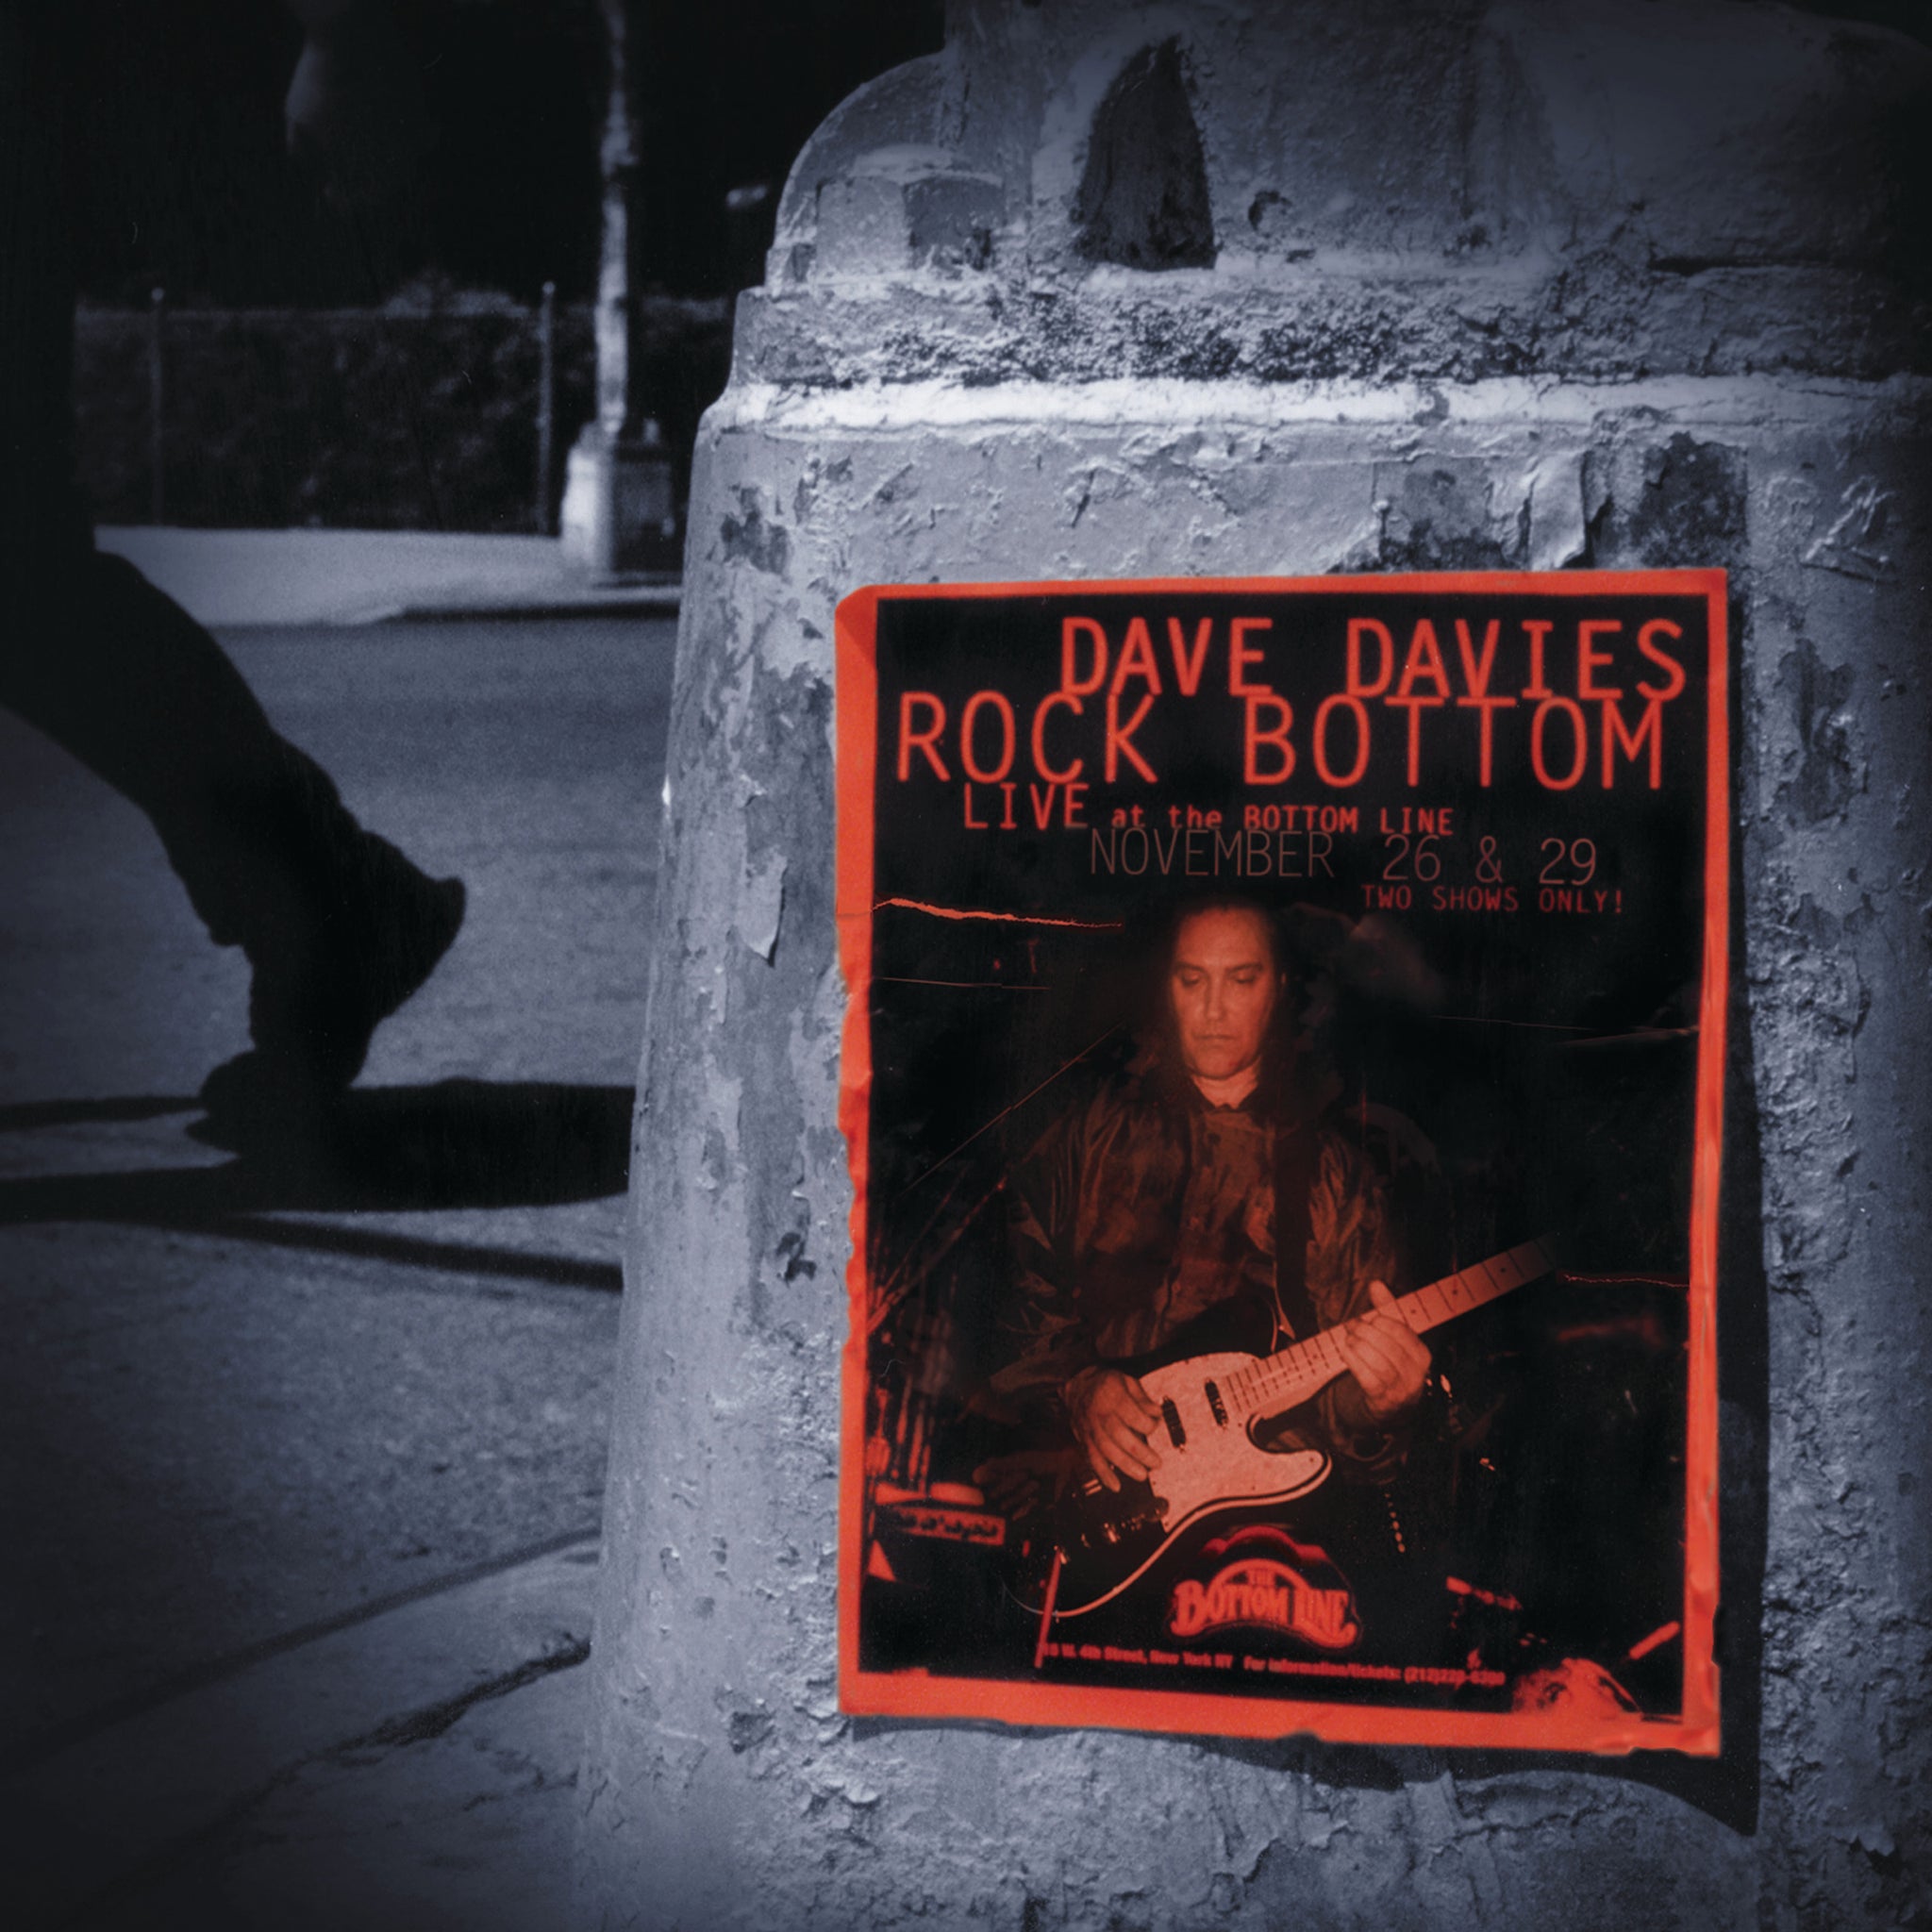 DAVE DAVIES - Rock Bottom: Live at the Bottom Line (Remastered 20th Anniversary Limited Edition) - 2LP Red & Silver [RSD2020-AUG29]